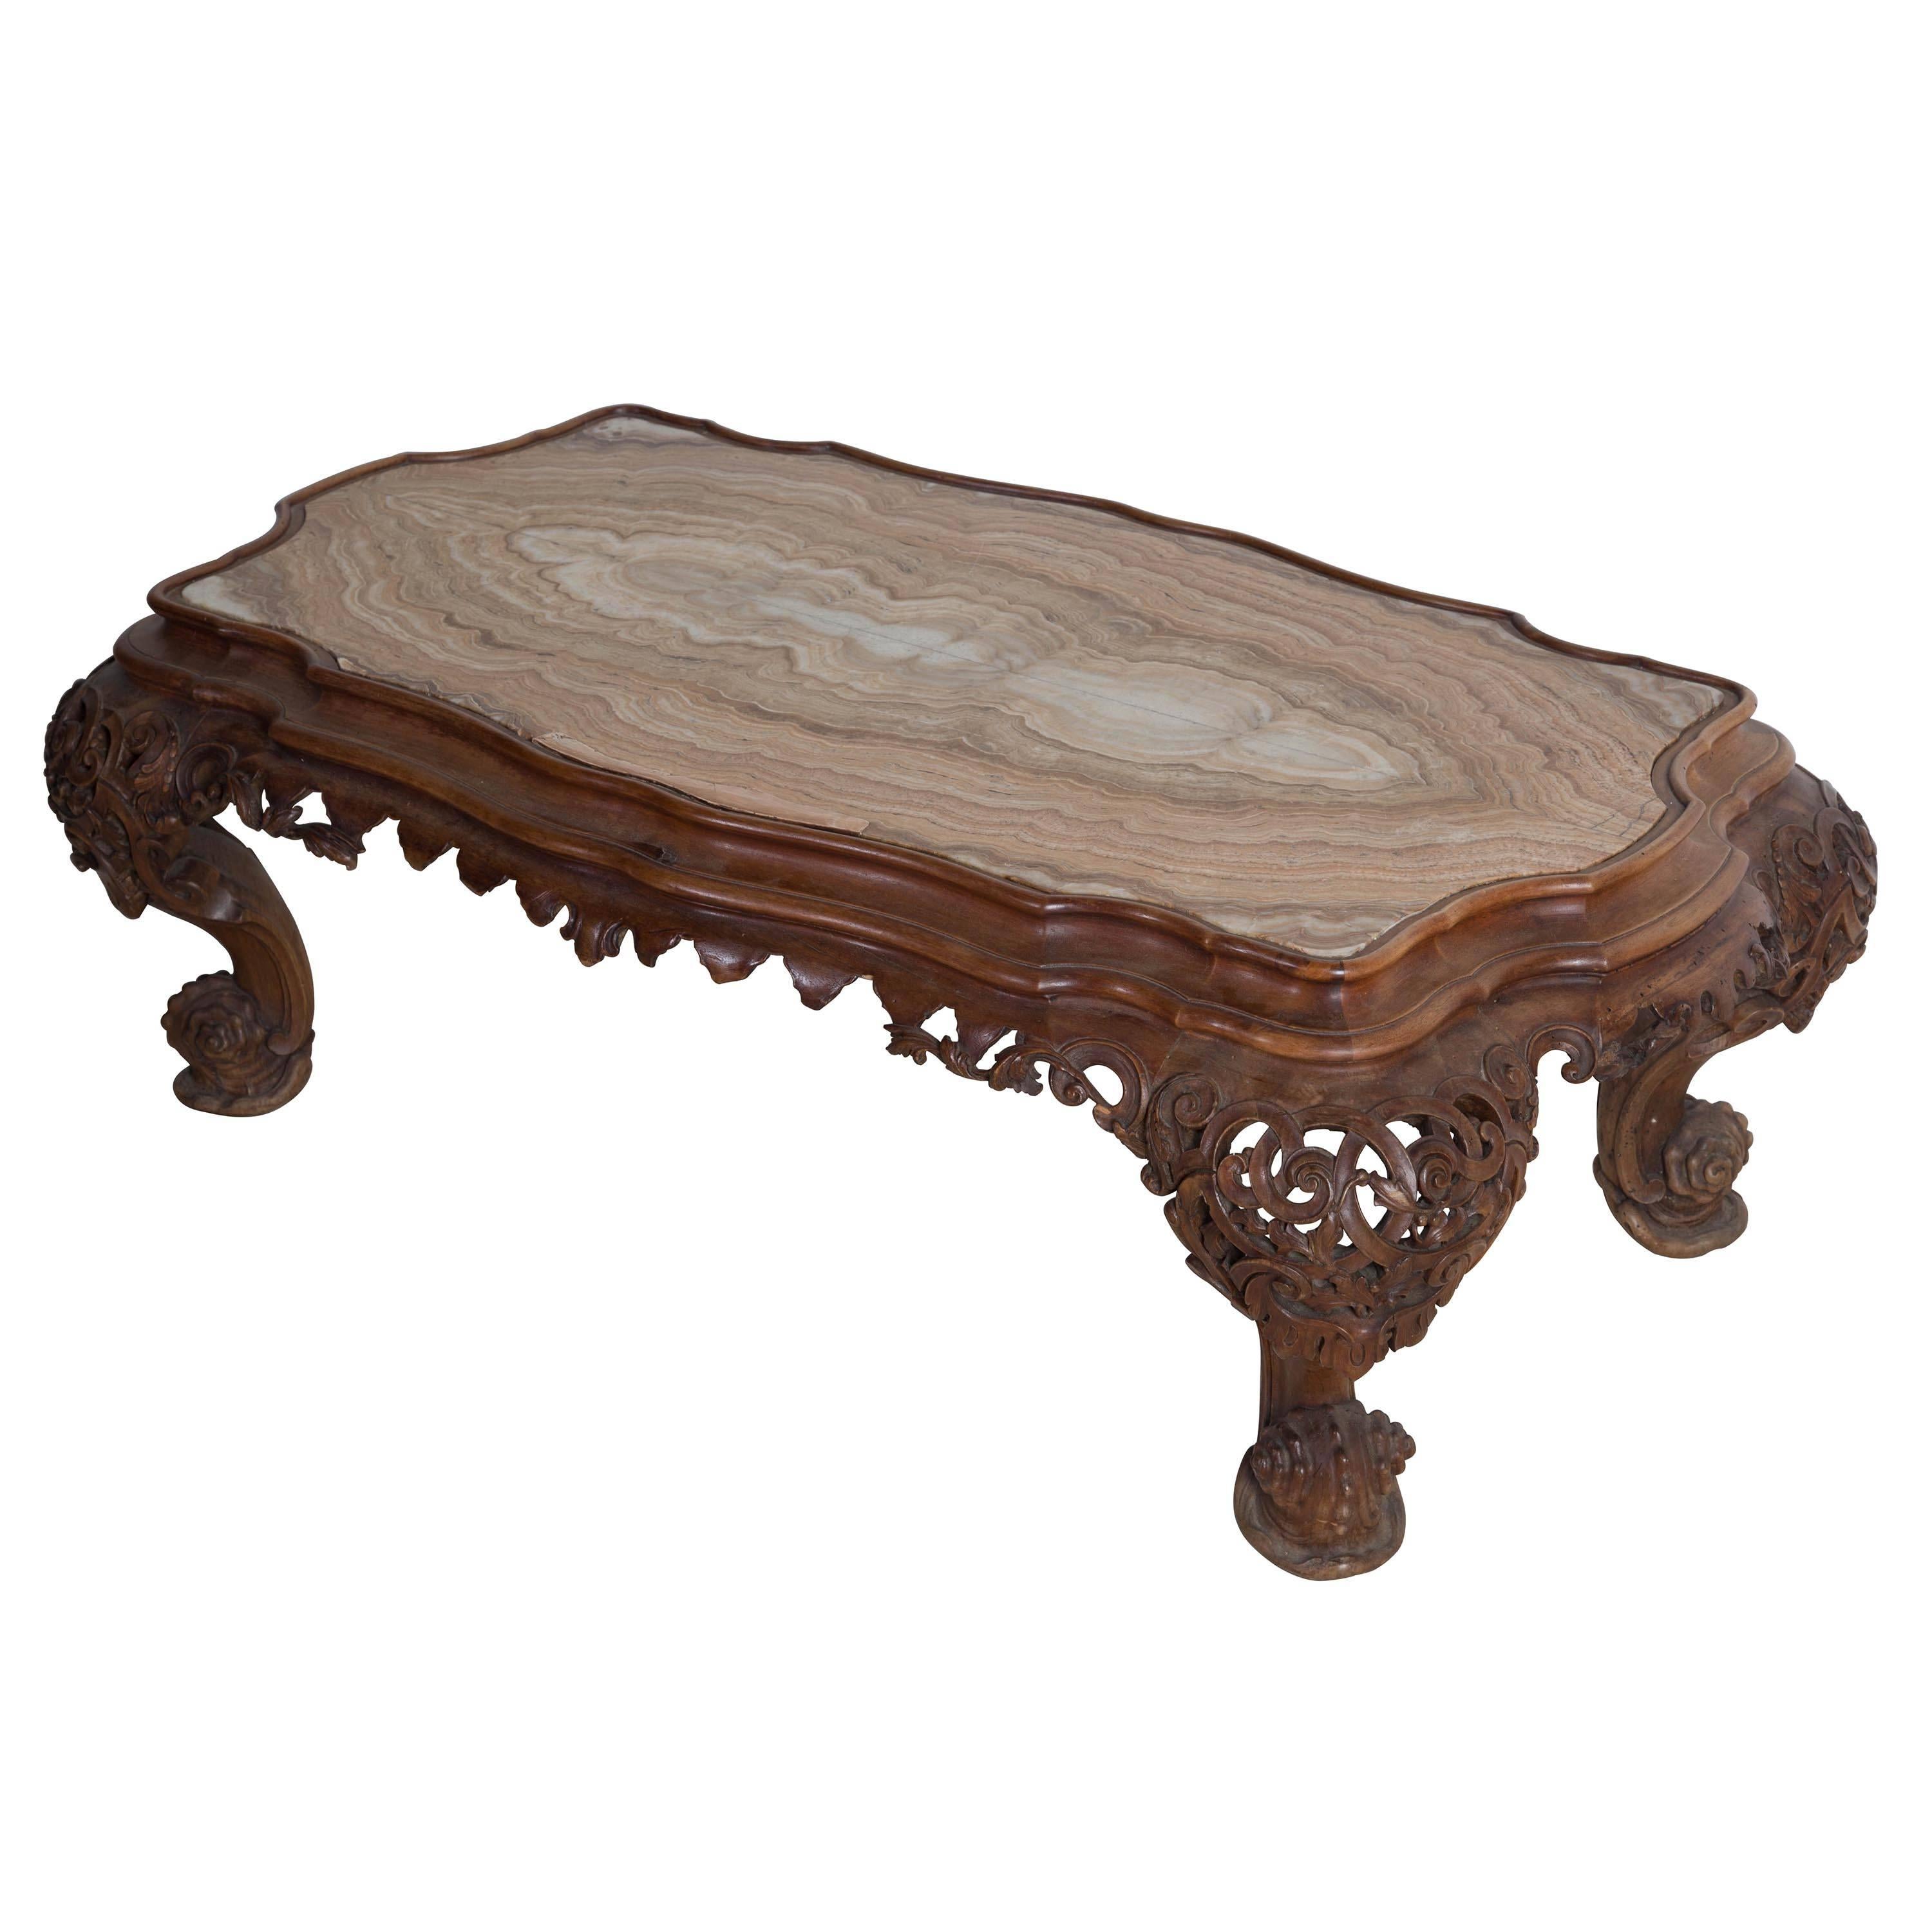 Venetian grotto coffee table with onyx top.